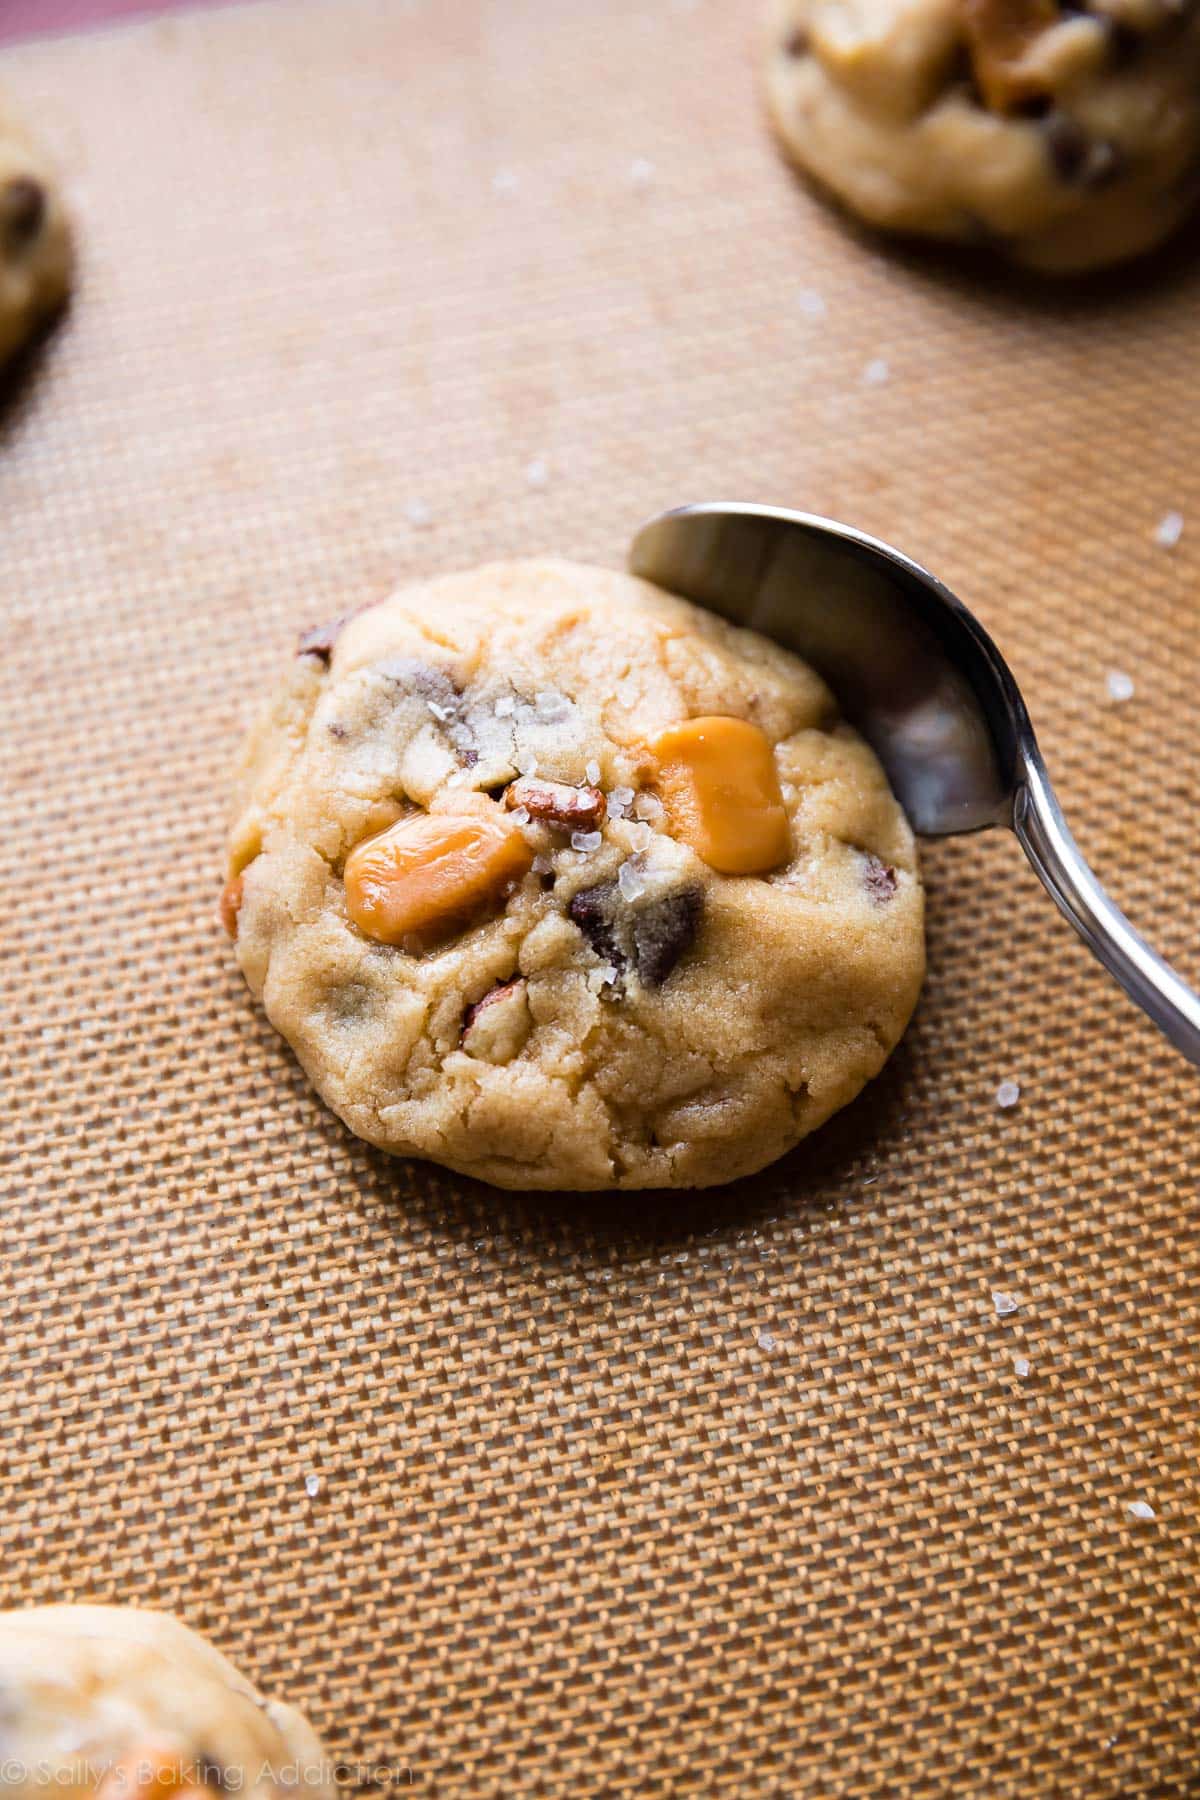 Caramel cookie after baking with a spoon shaping the edges